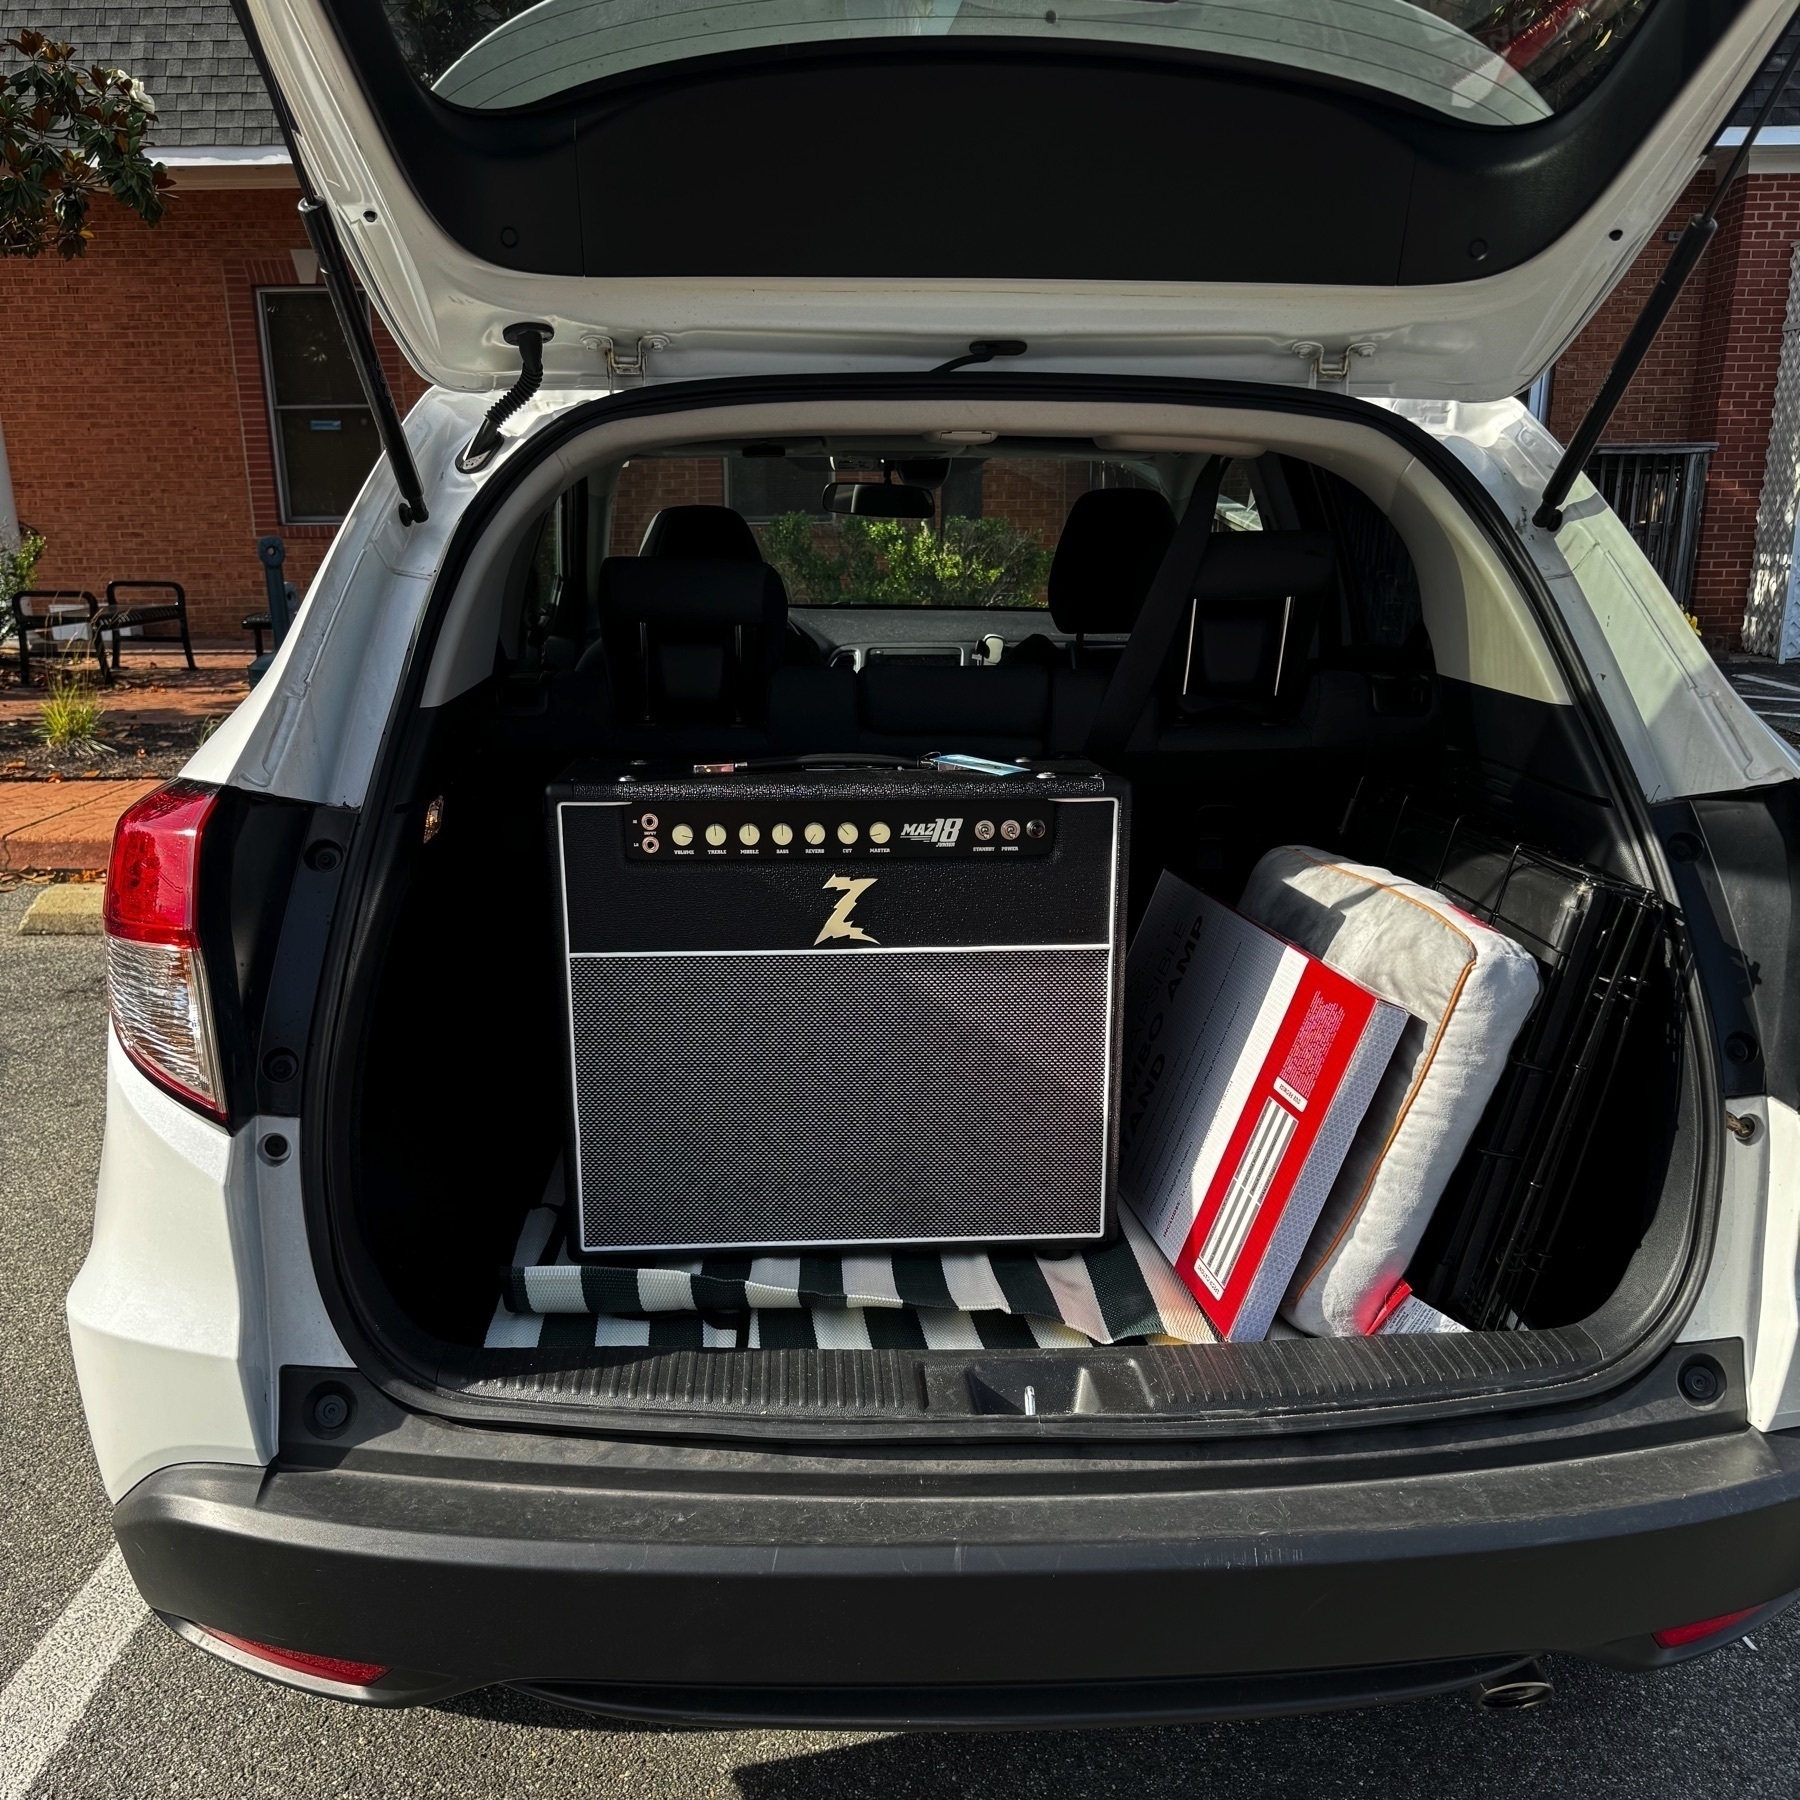 Dr. Z Maz 18 Jr. 1x12 in black in the back of a white Honda HRV with the hatch open.